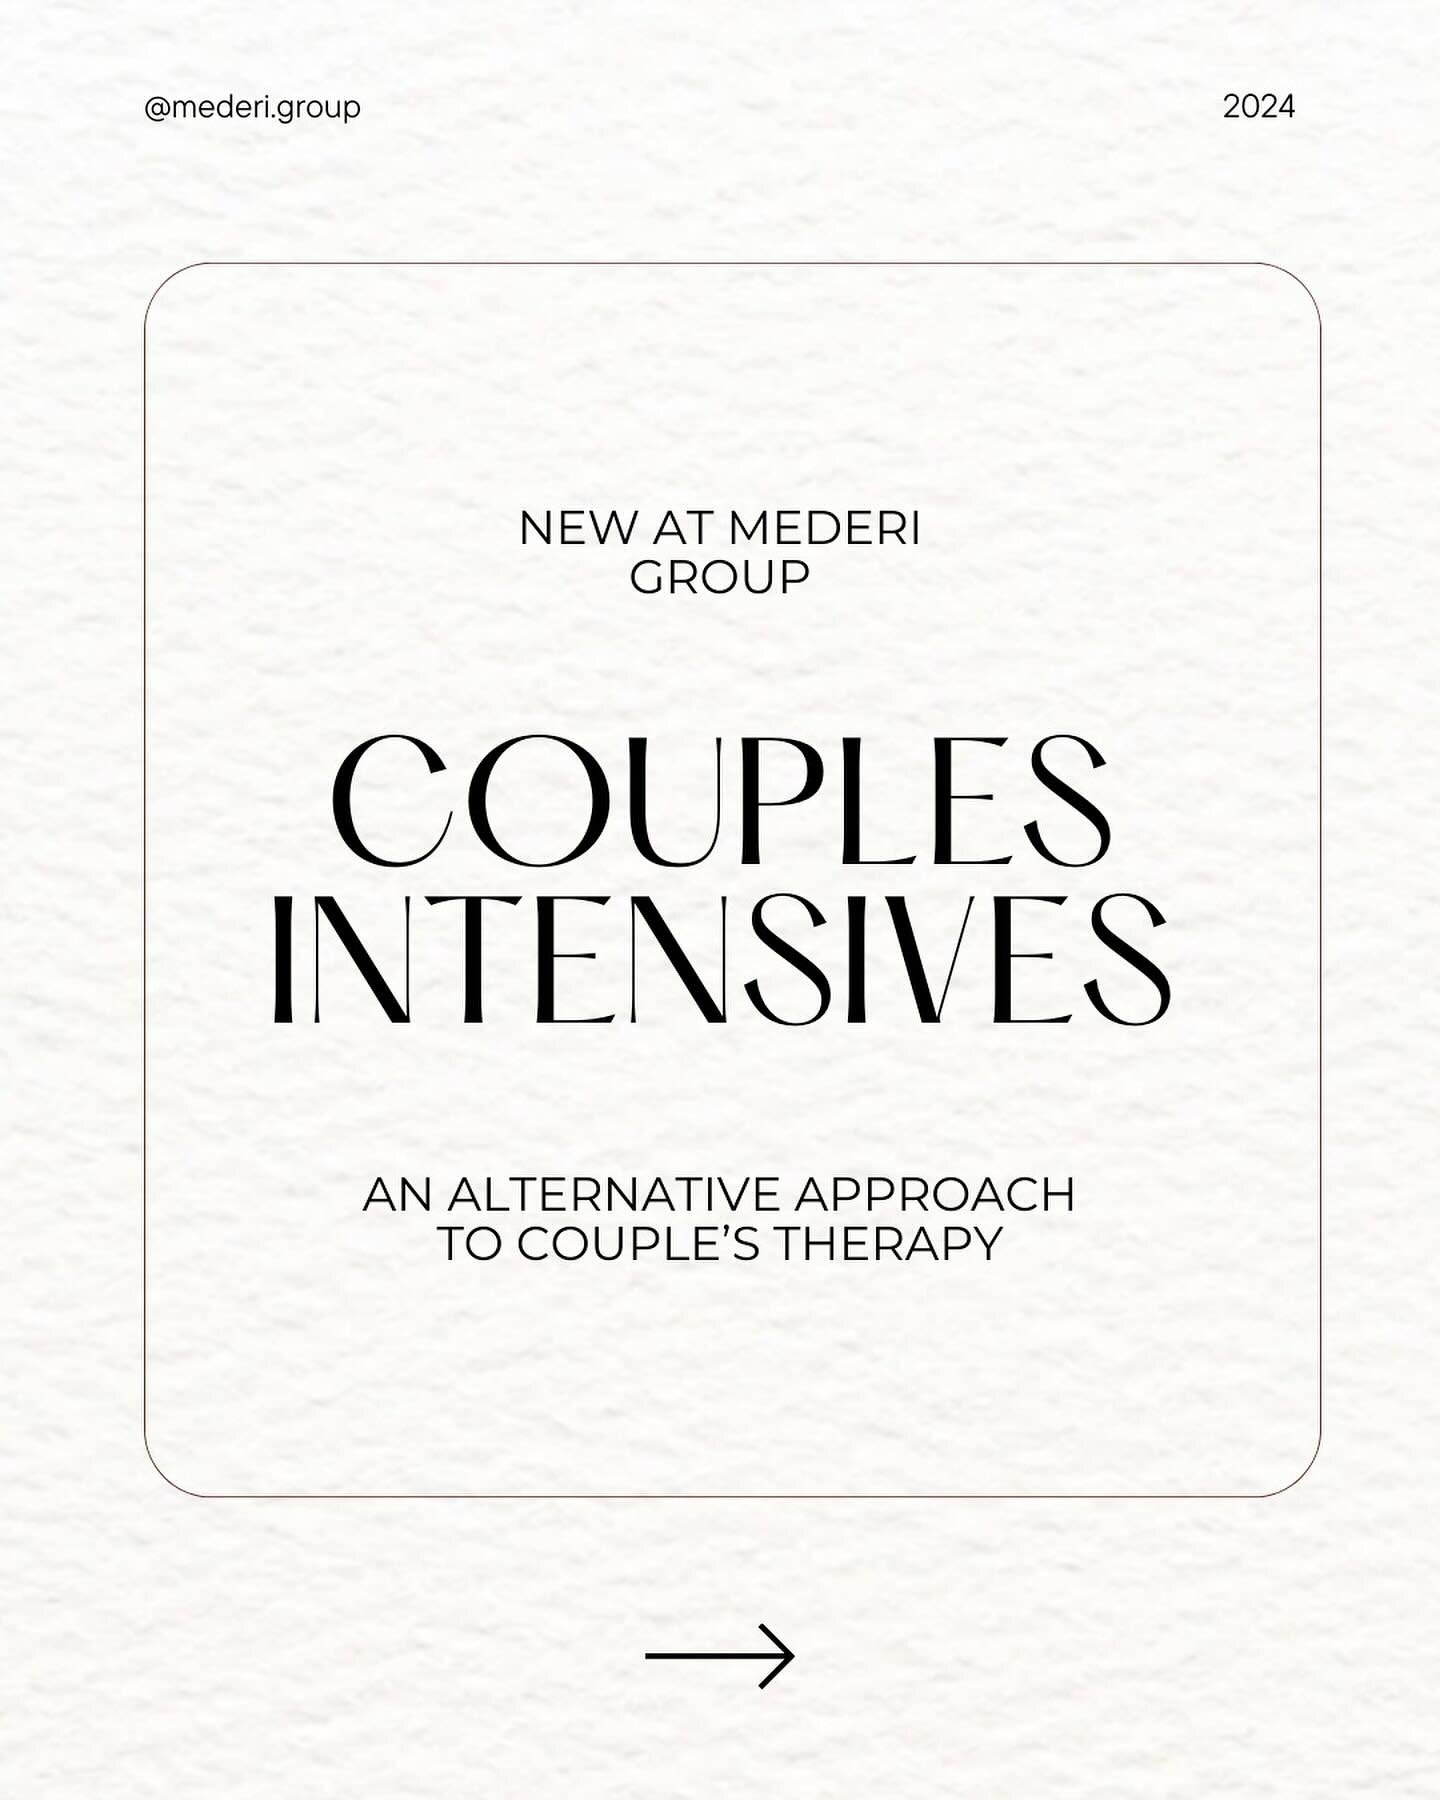 We are excited to announce a new addition at Mederi Group: Couples Intensives! 

Whether you are stepping into couples counseling for the first time or actively working on your relationship, our 2-day intensive provides an in-depth exploration of you